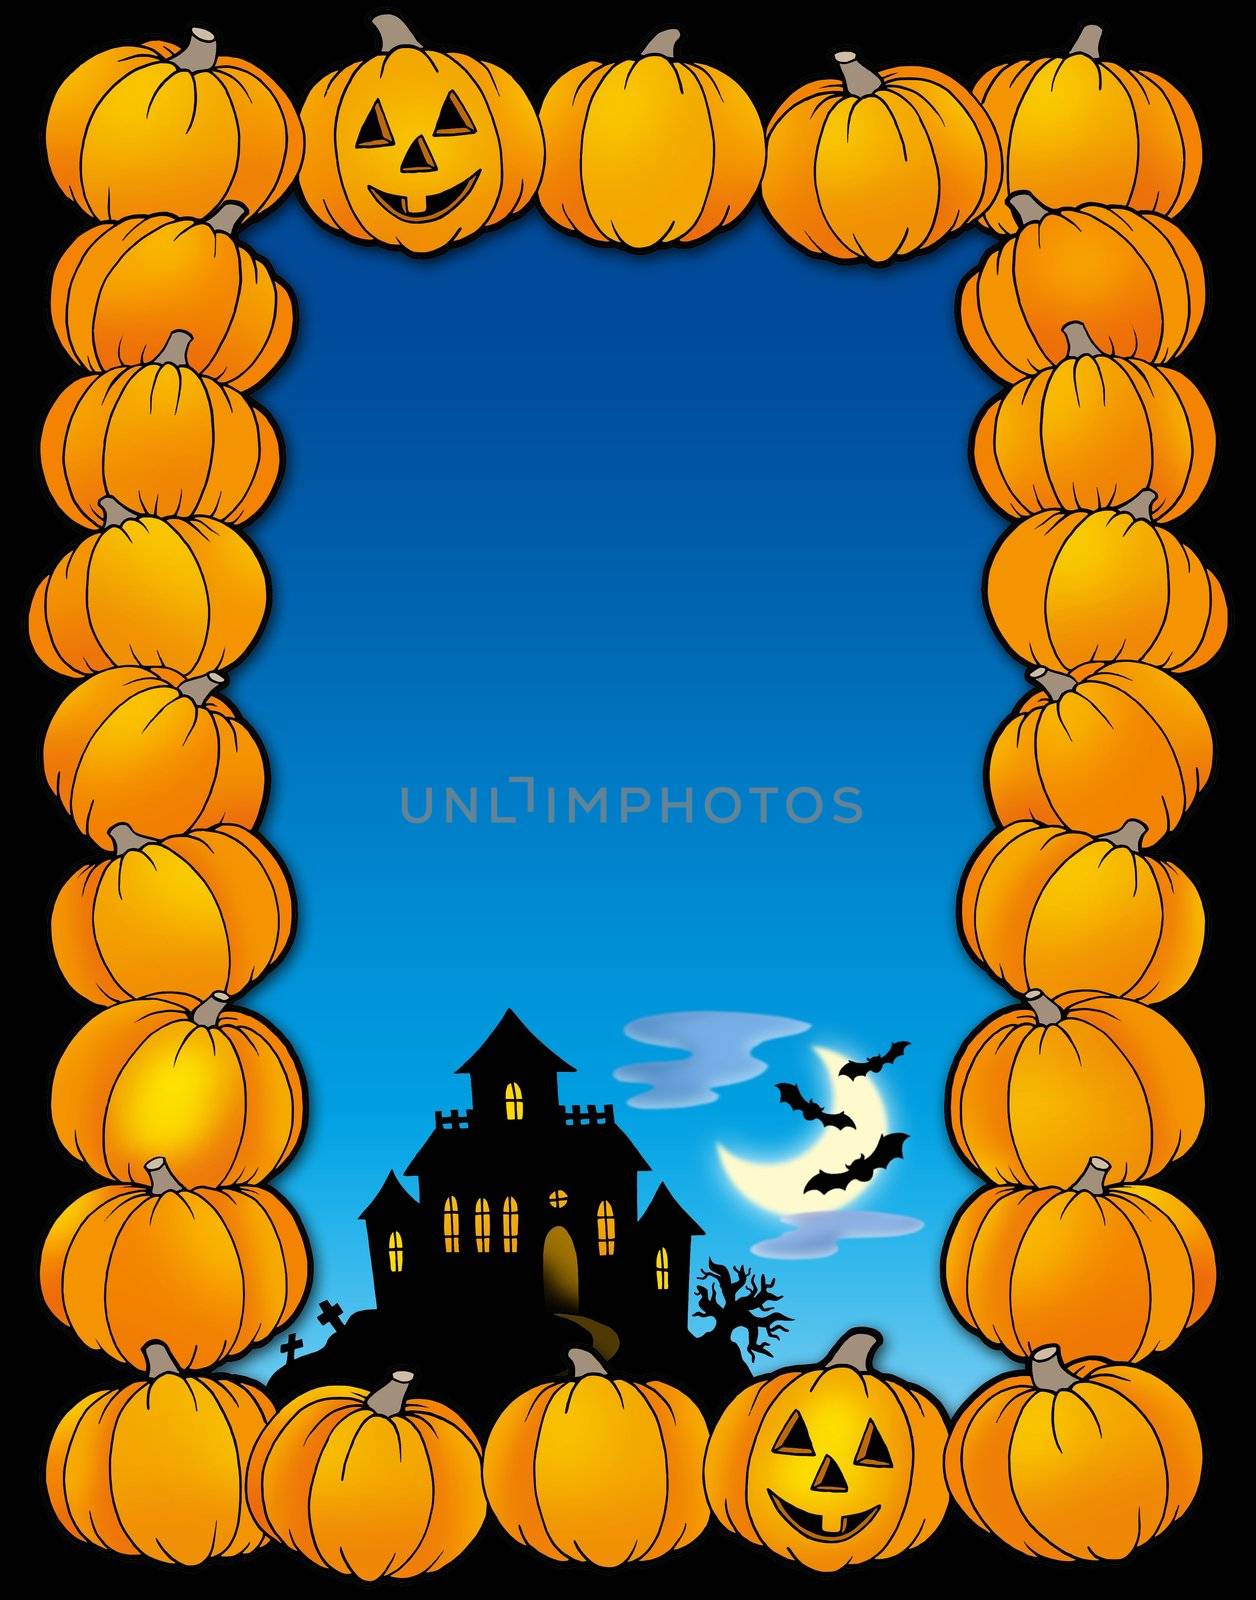 Halloween frame with house - color illustration.